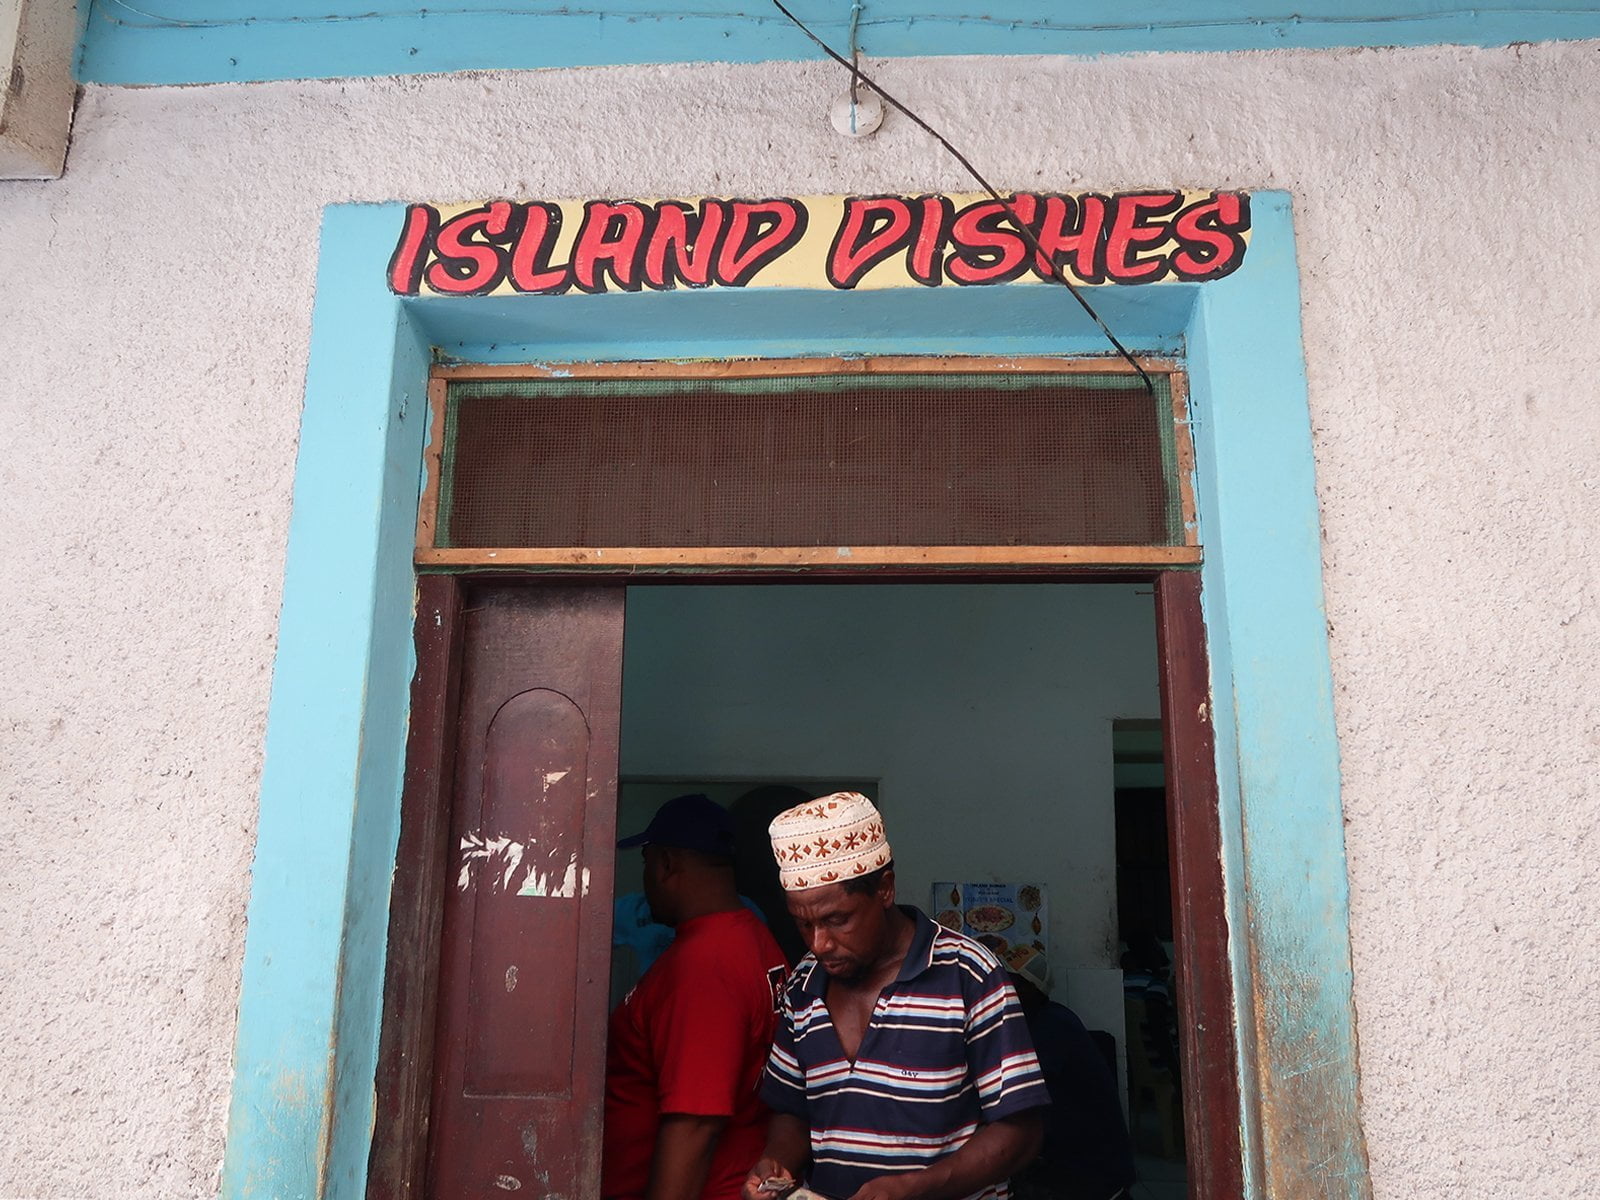 Eating at Island Dishes is a thing to do in Lamu